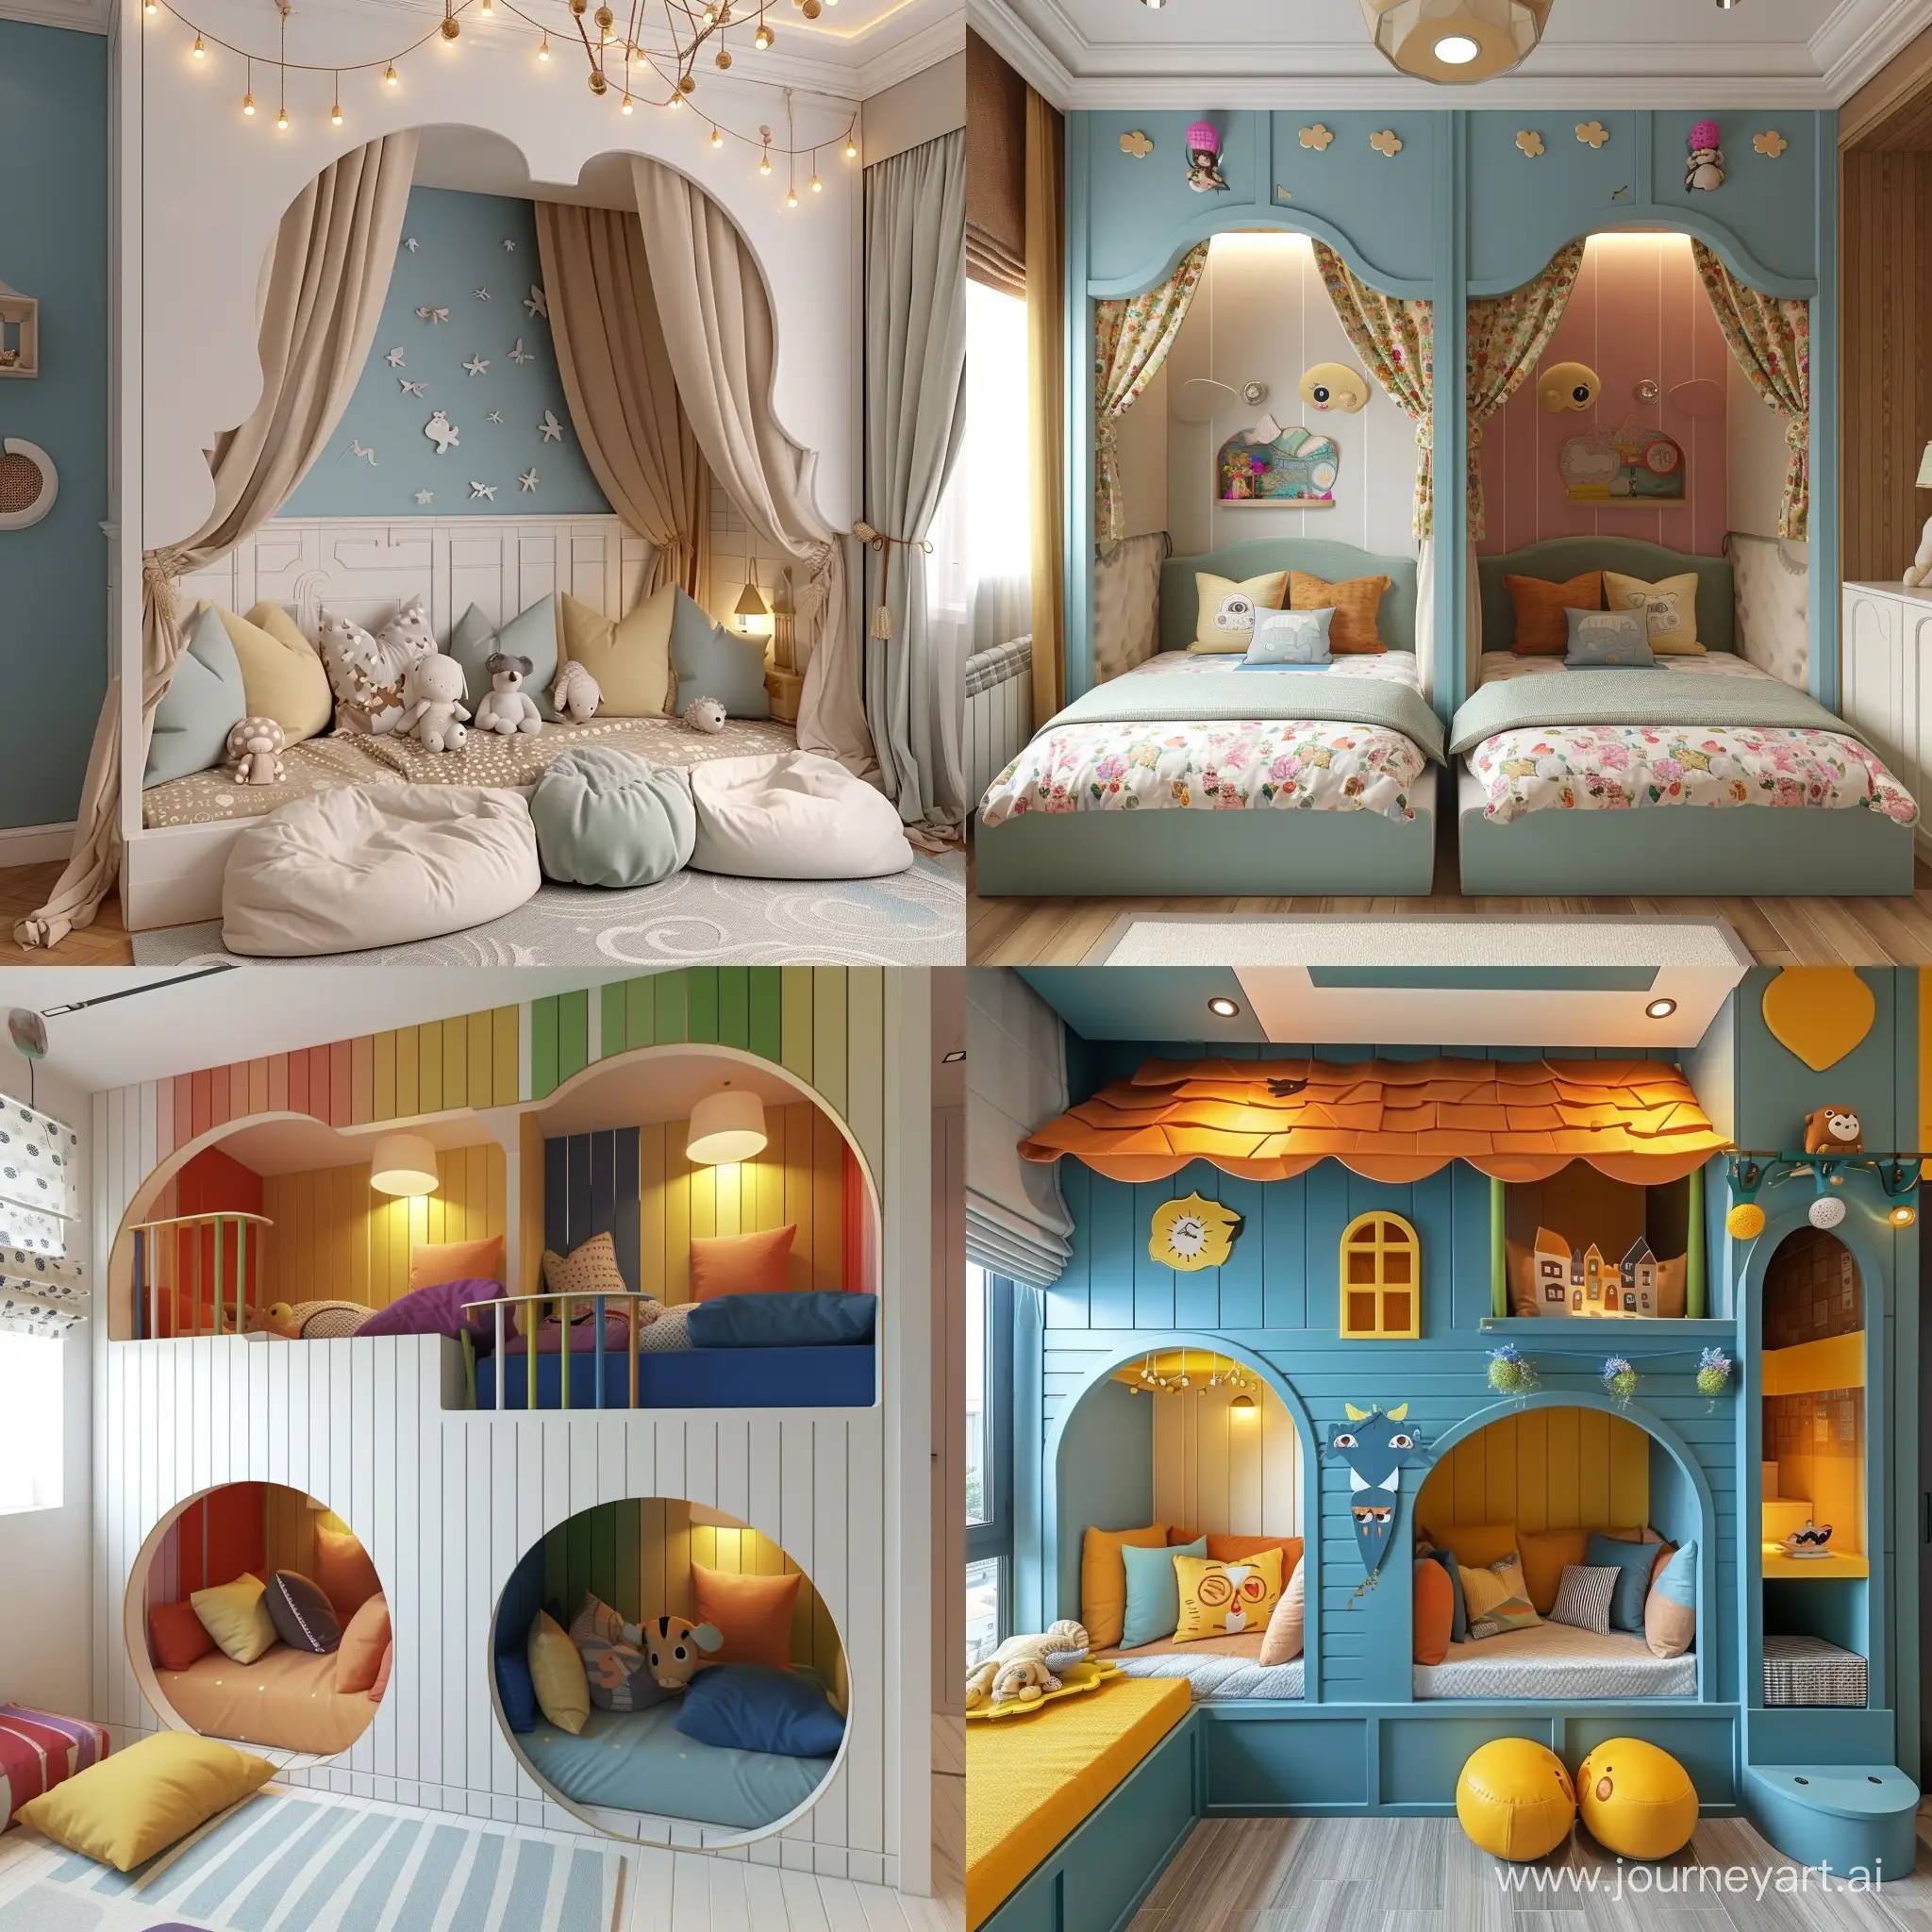 Adorable-Childrens-Room-Interior-Design-with-Playful-Atmosphere